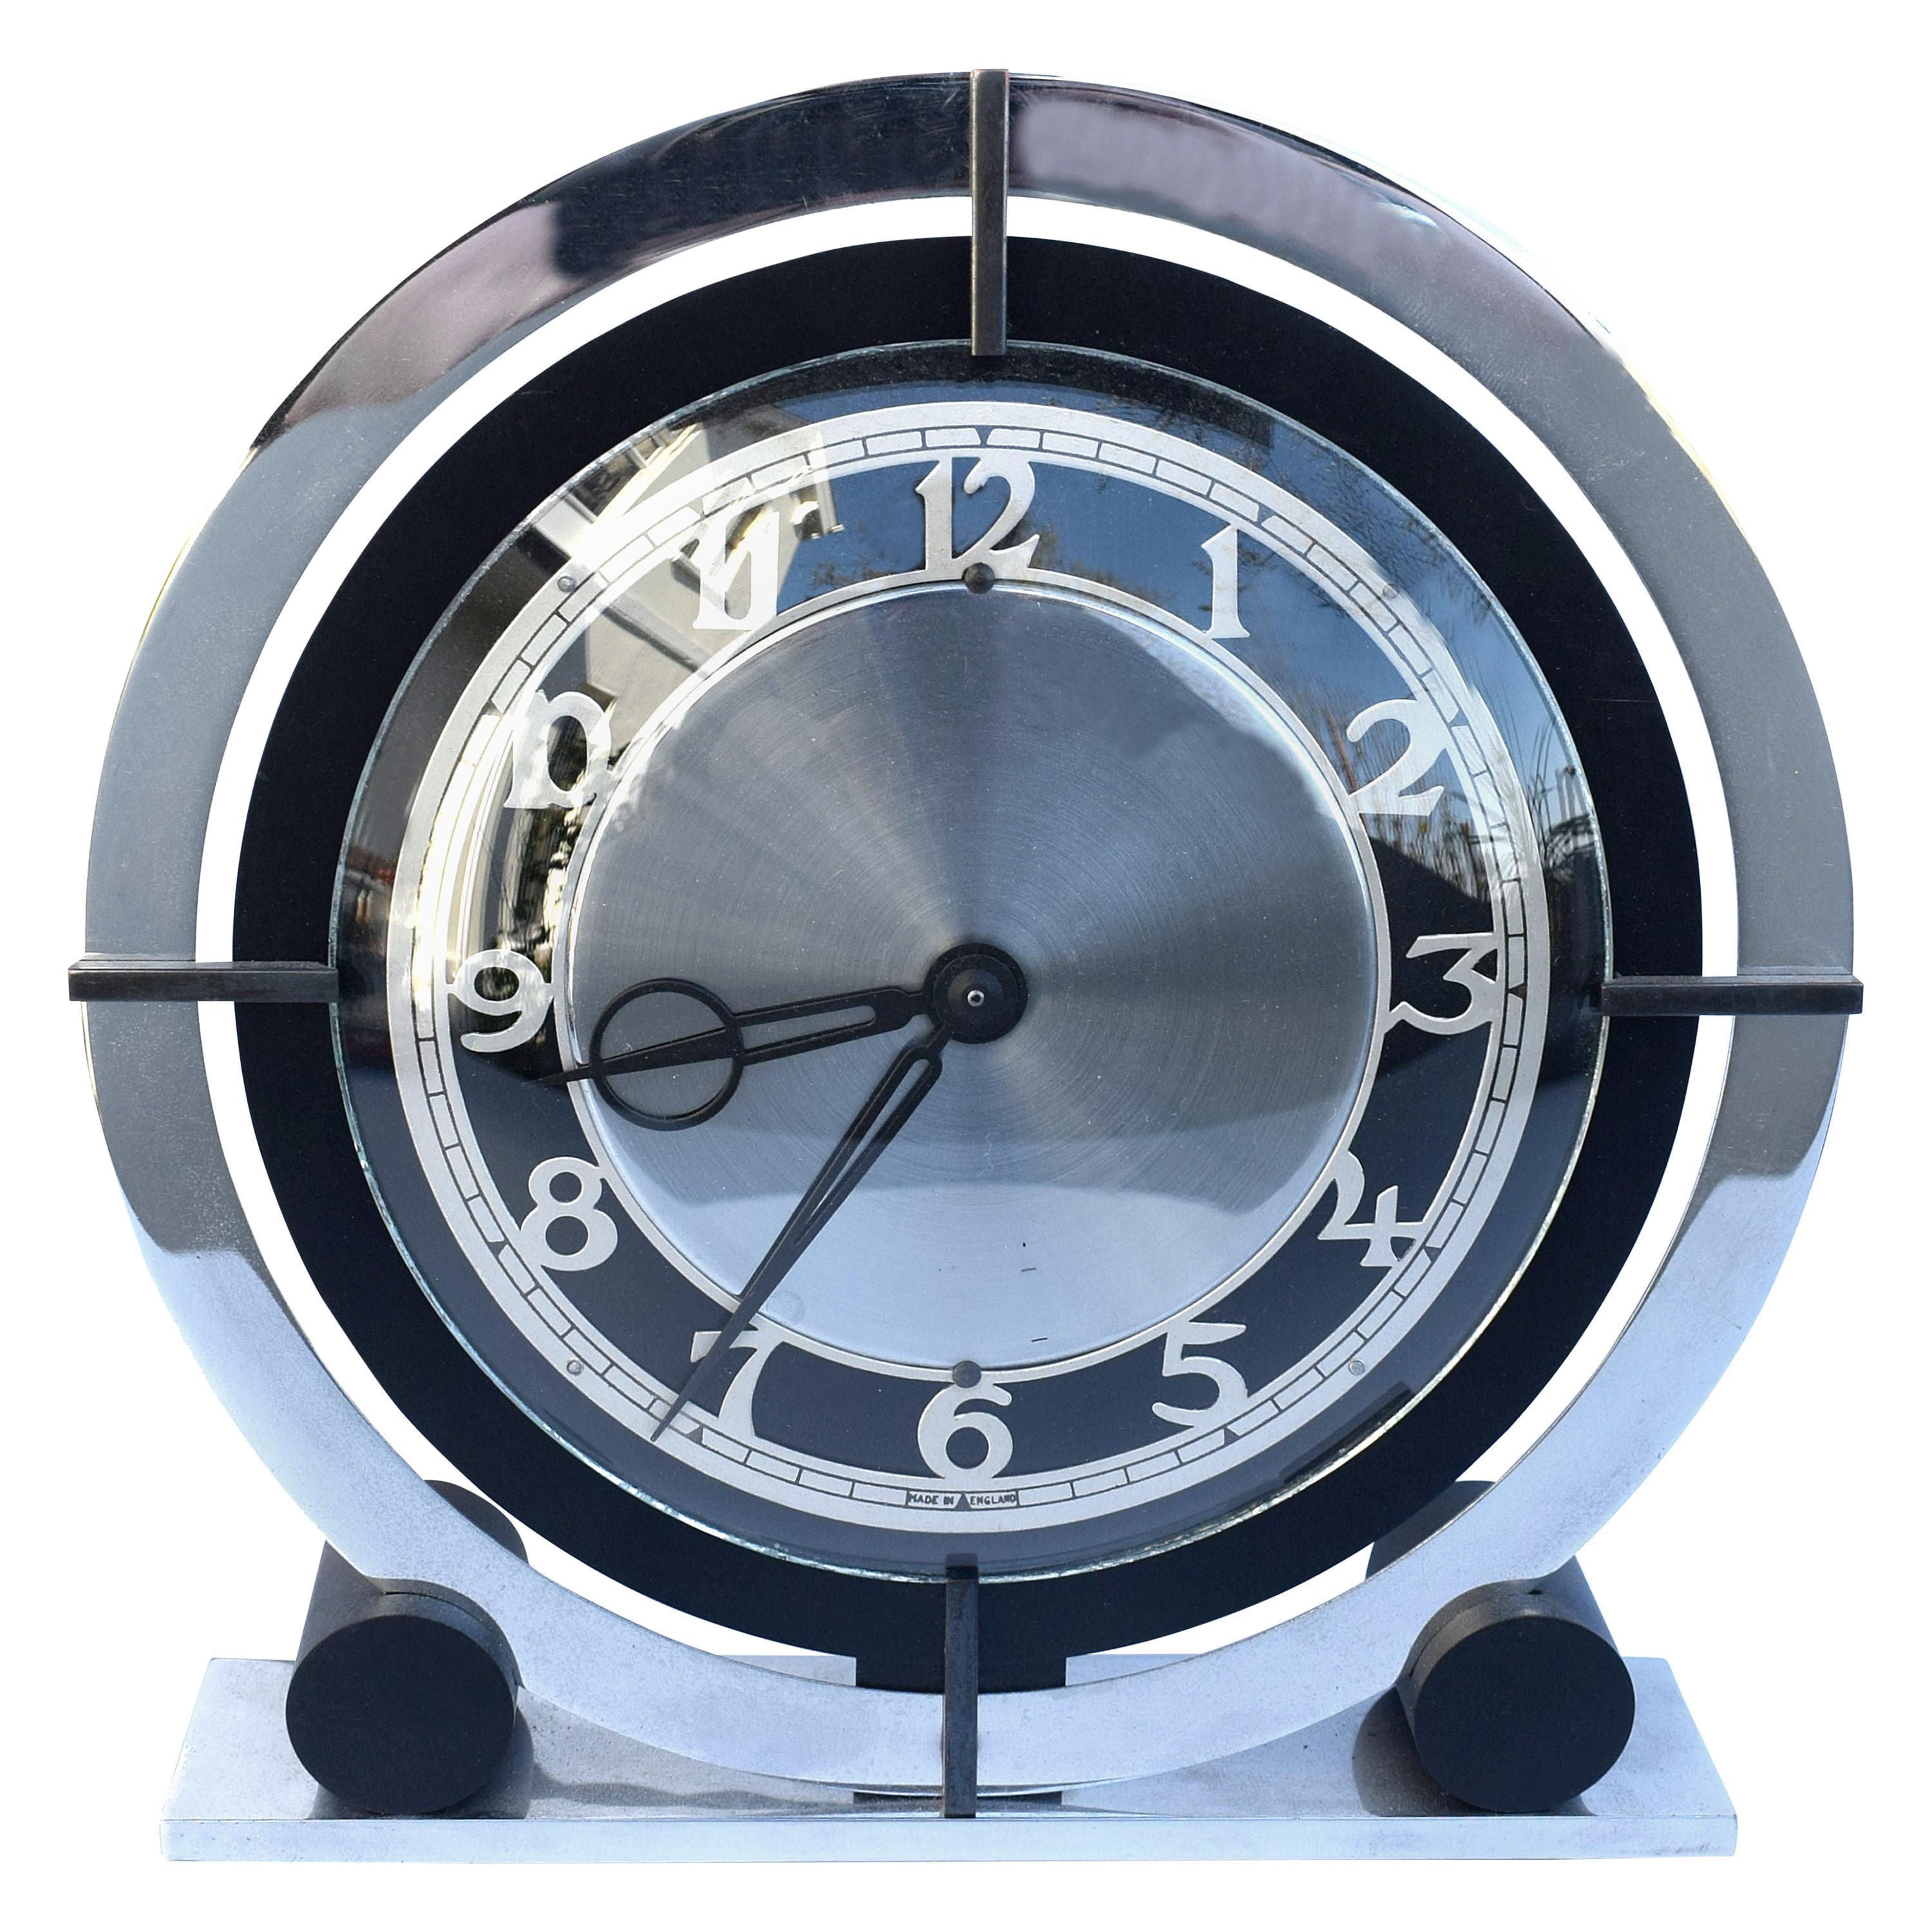 Art Deco Modernist Chrome And Bakelite Electric Clock By Temco